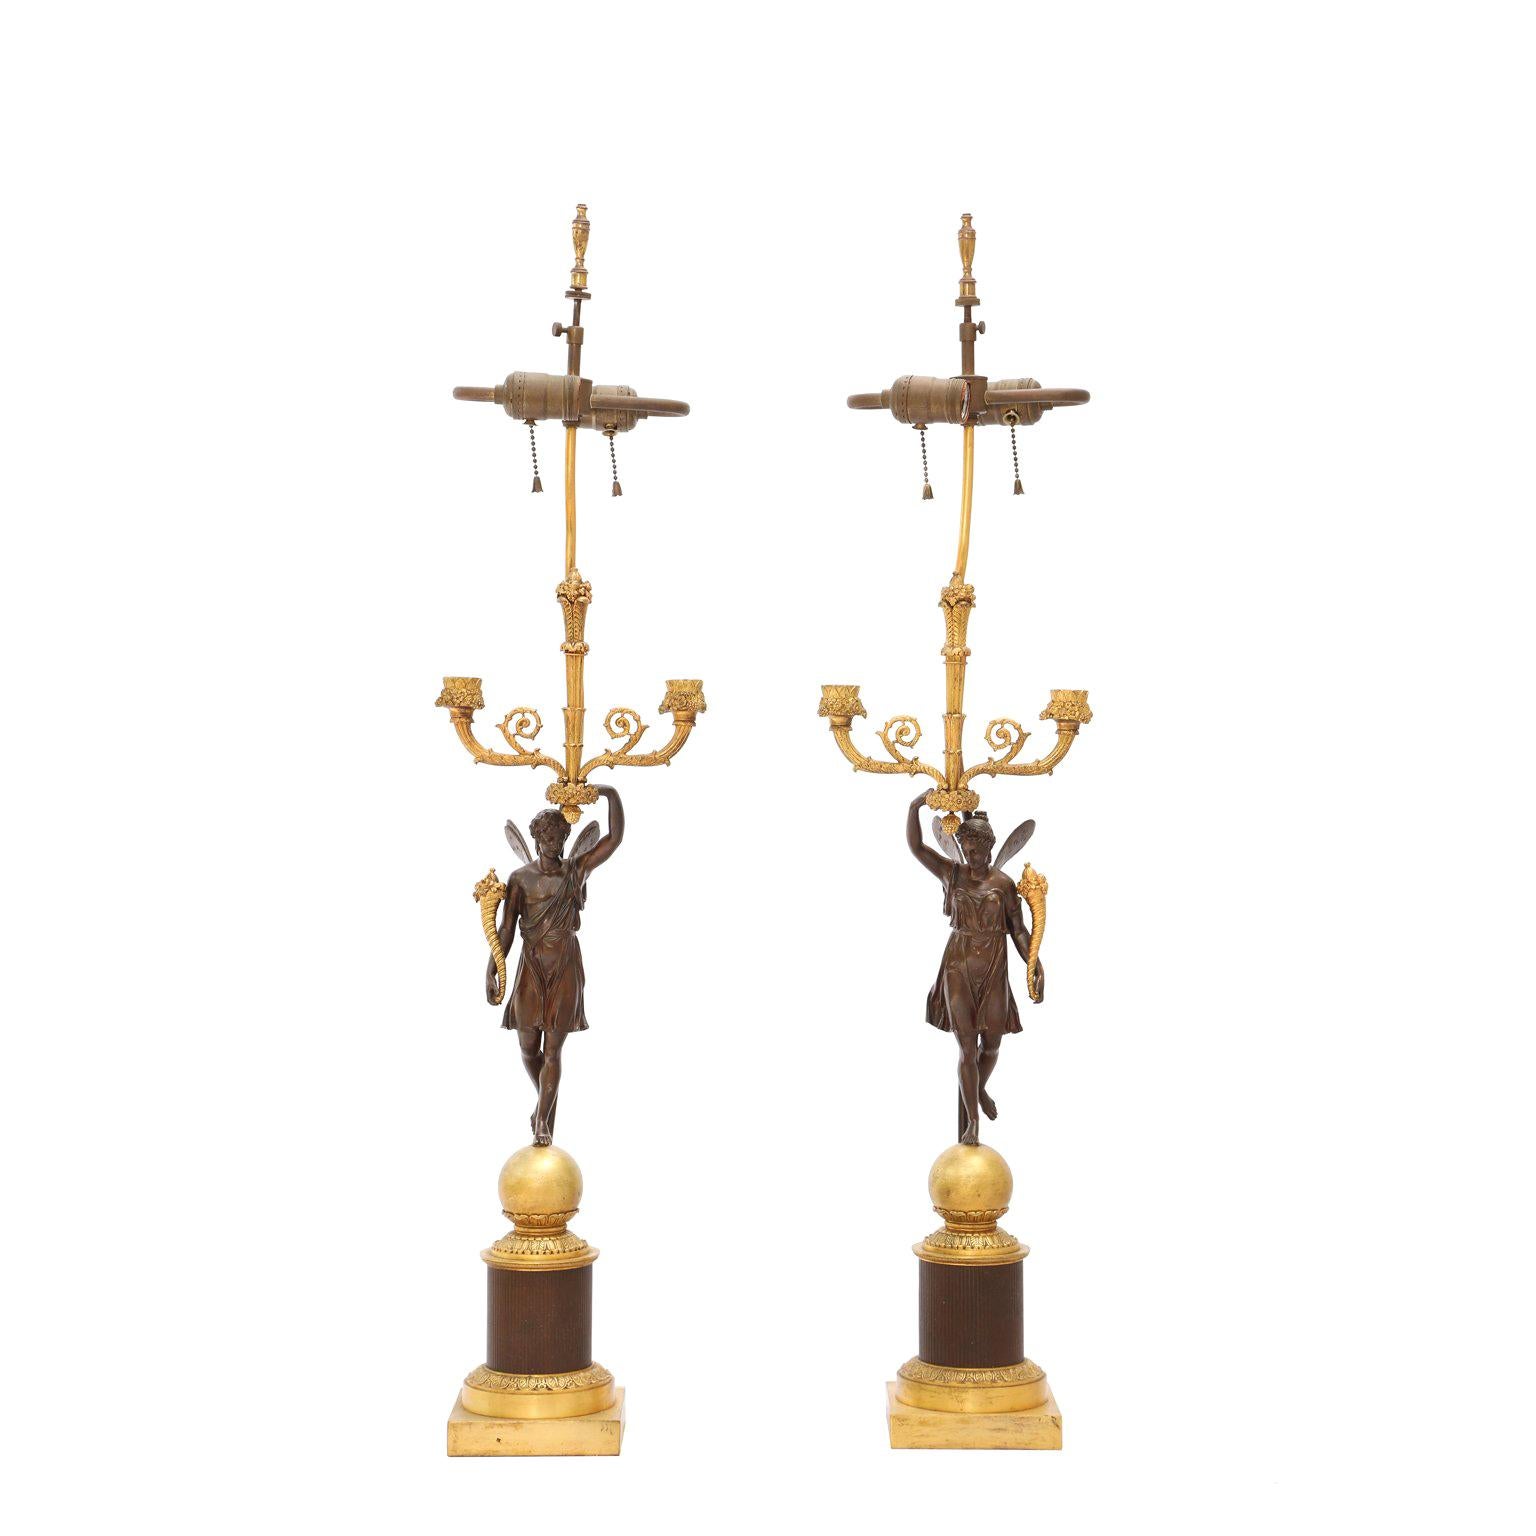 Pair of 19th Century French Ormolu and Patinated Bronze Figural Candelabra Lamps